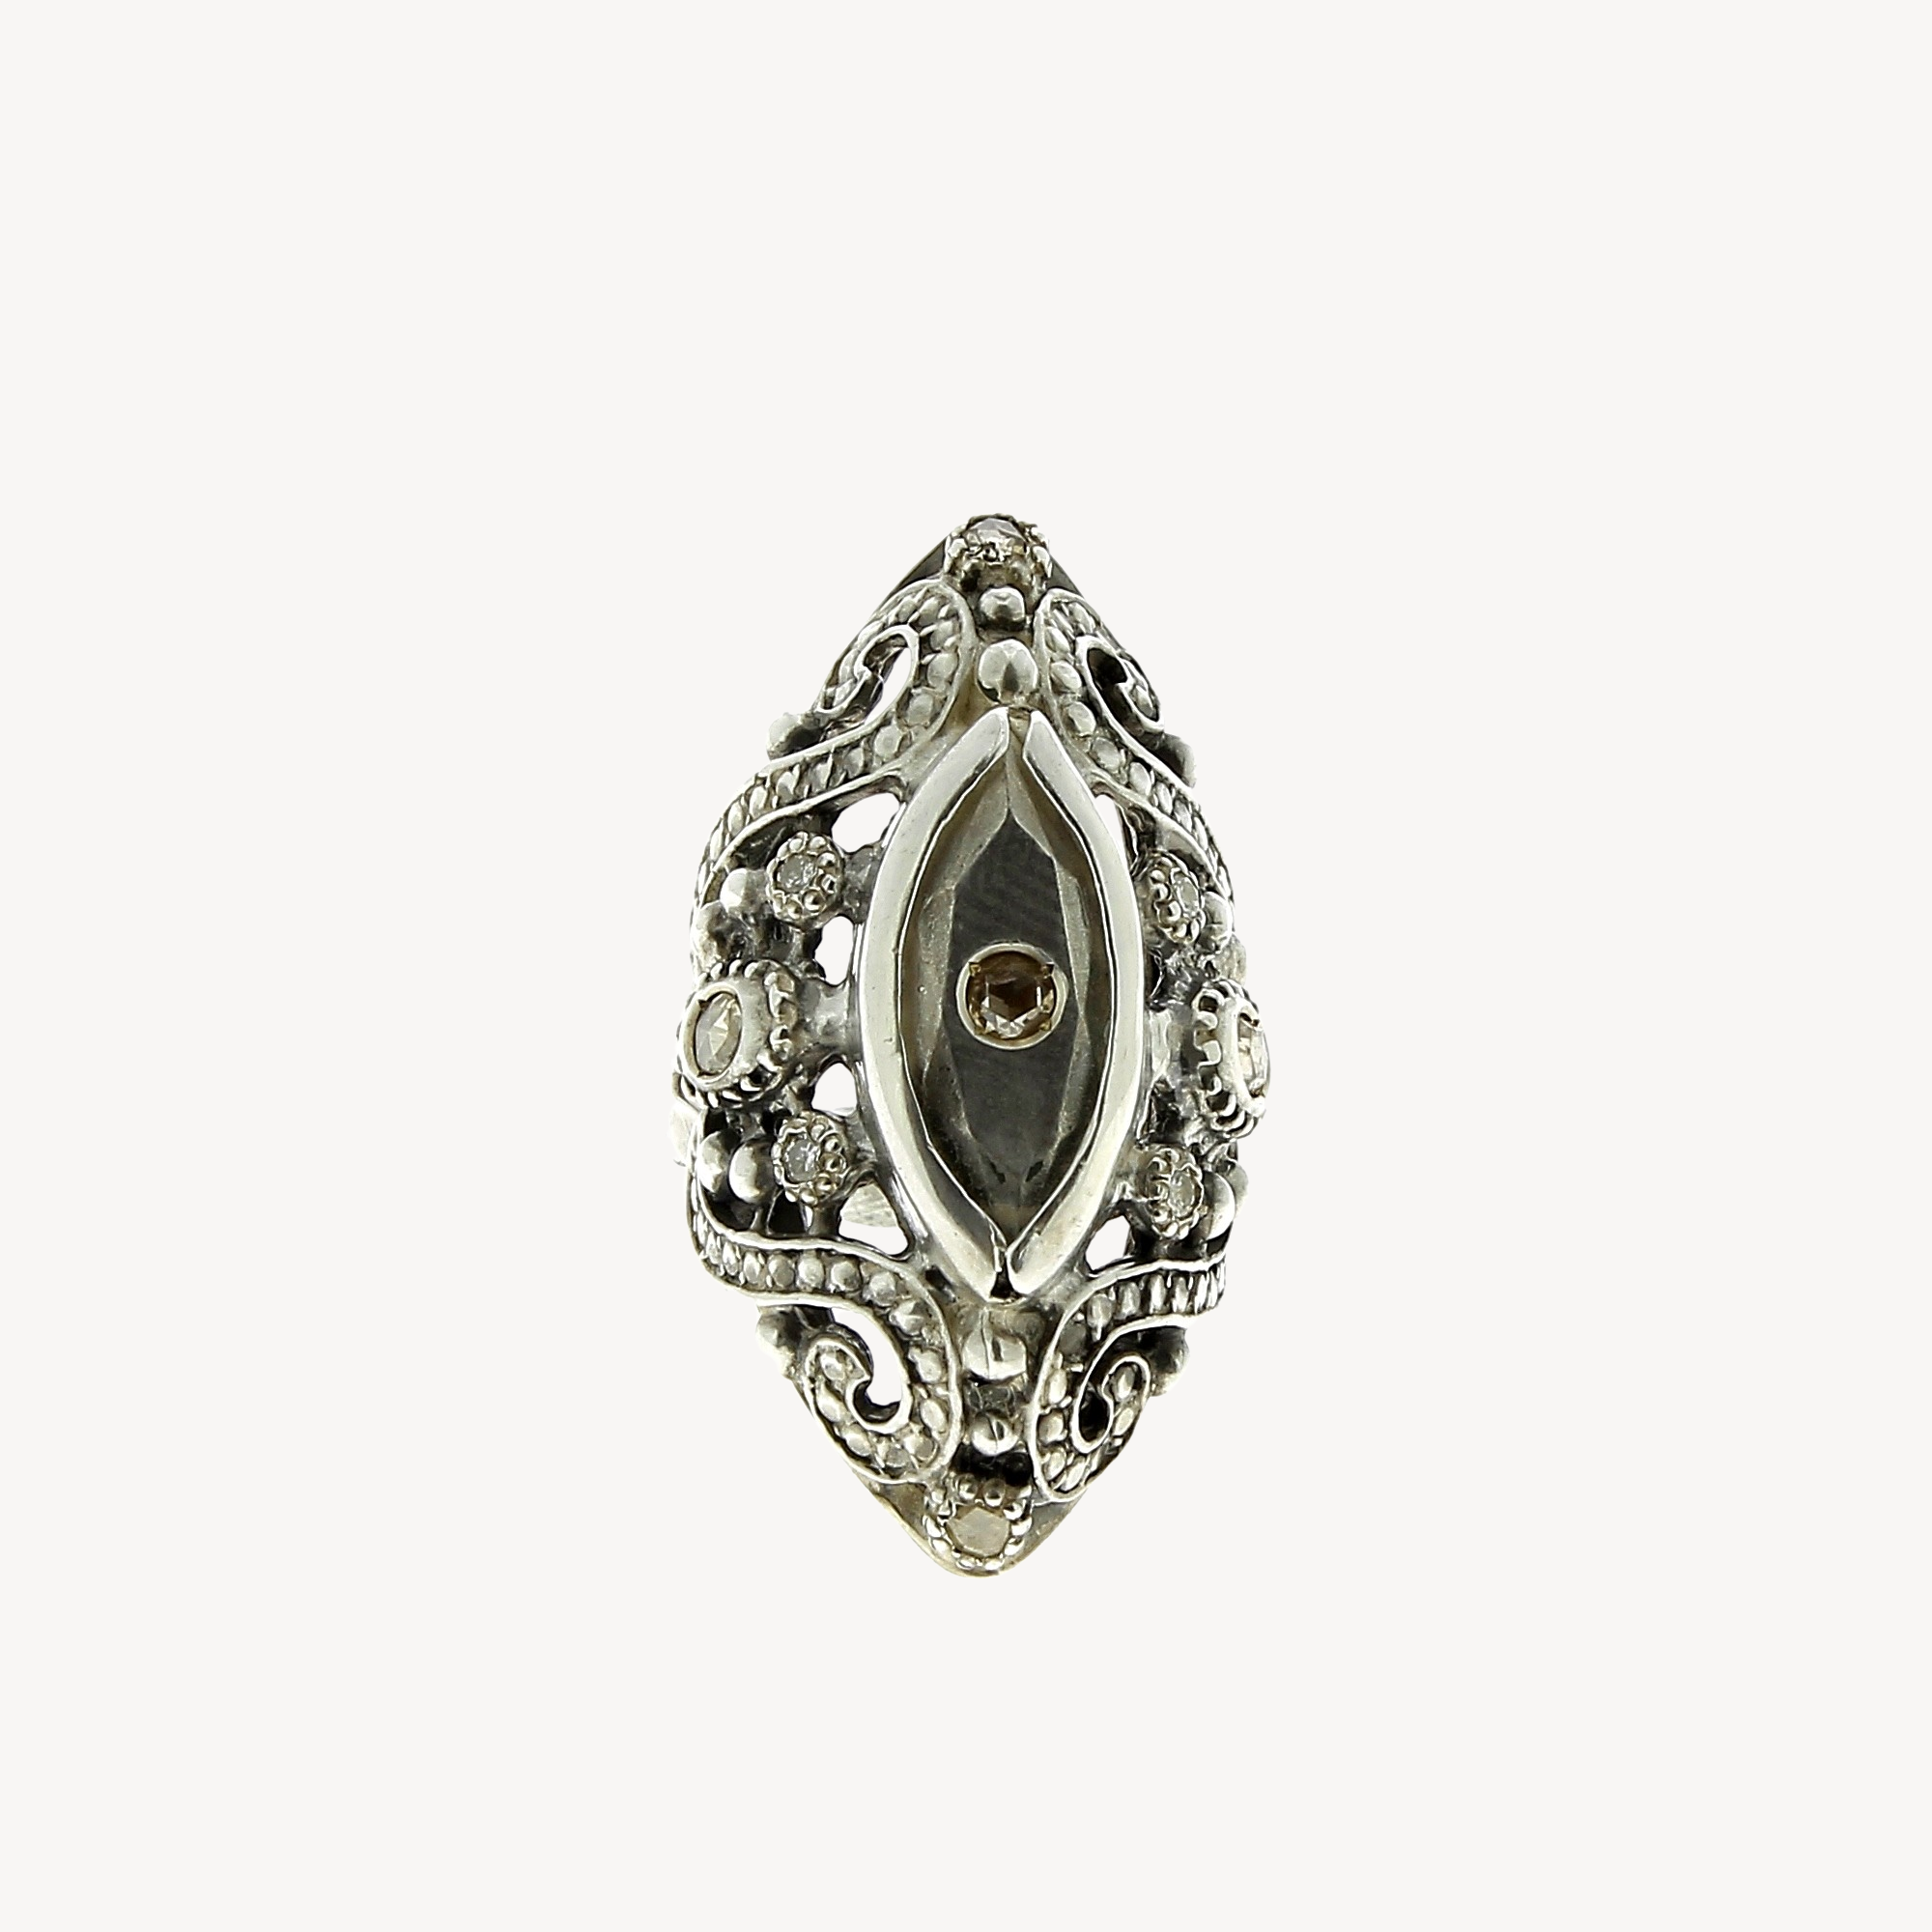 Mariach ring with diamonds